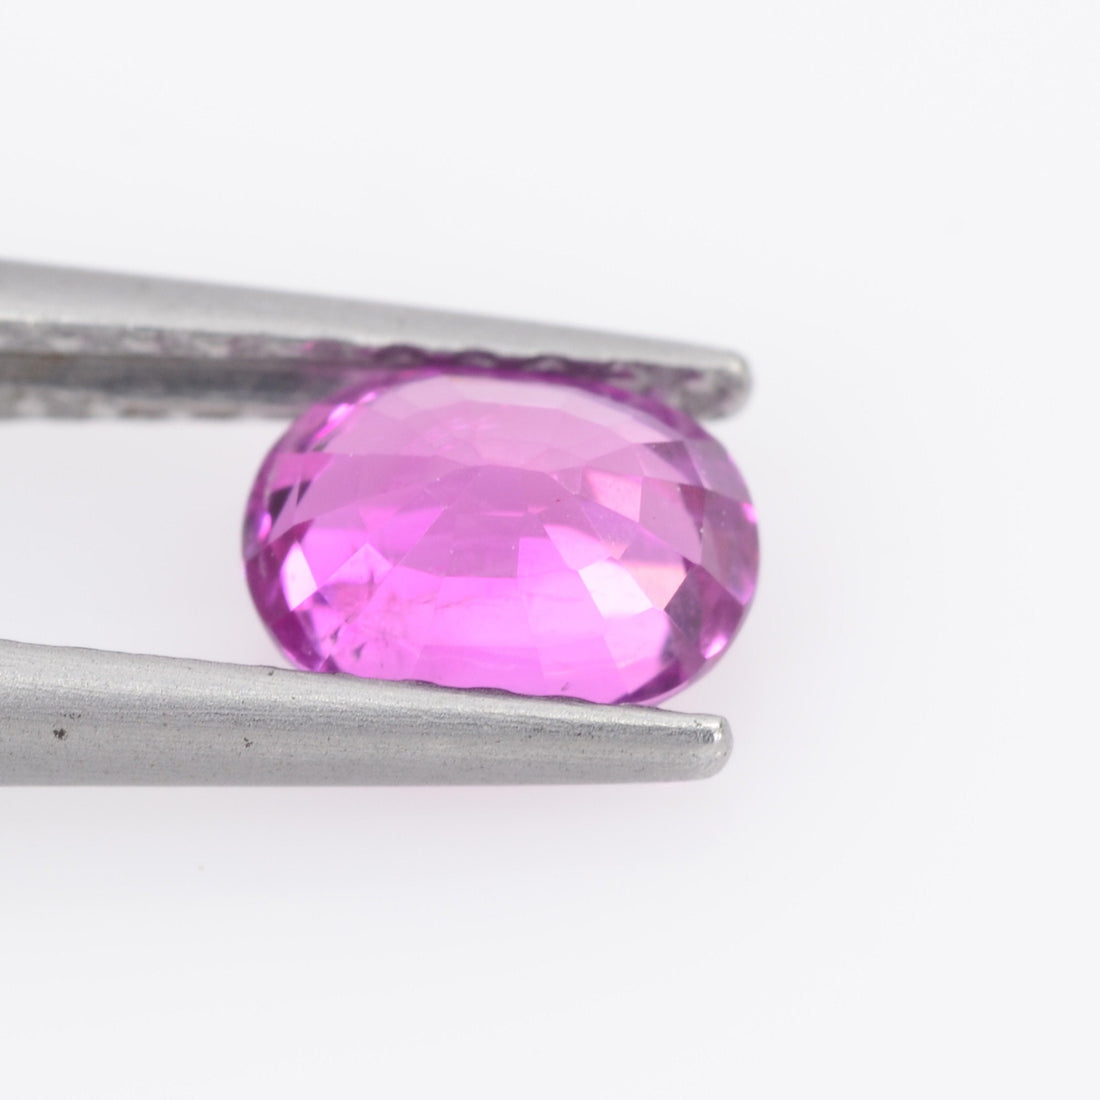 0.74 cts Natural Pink Sapphire Loose Gemstone Oval Cut